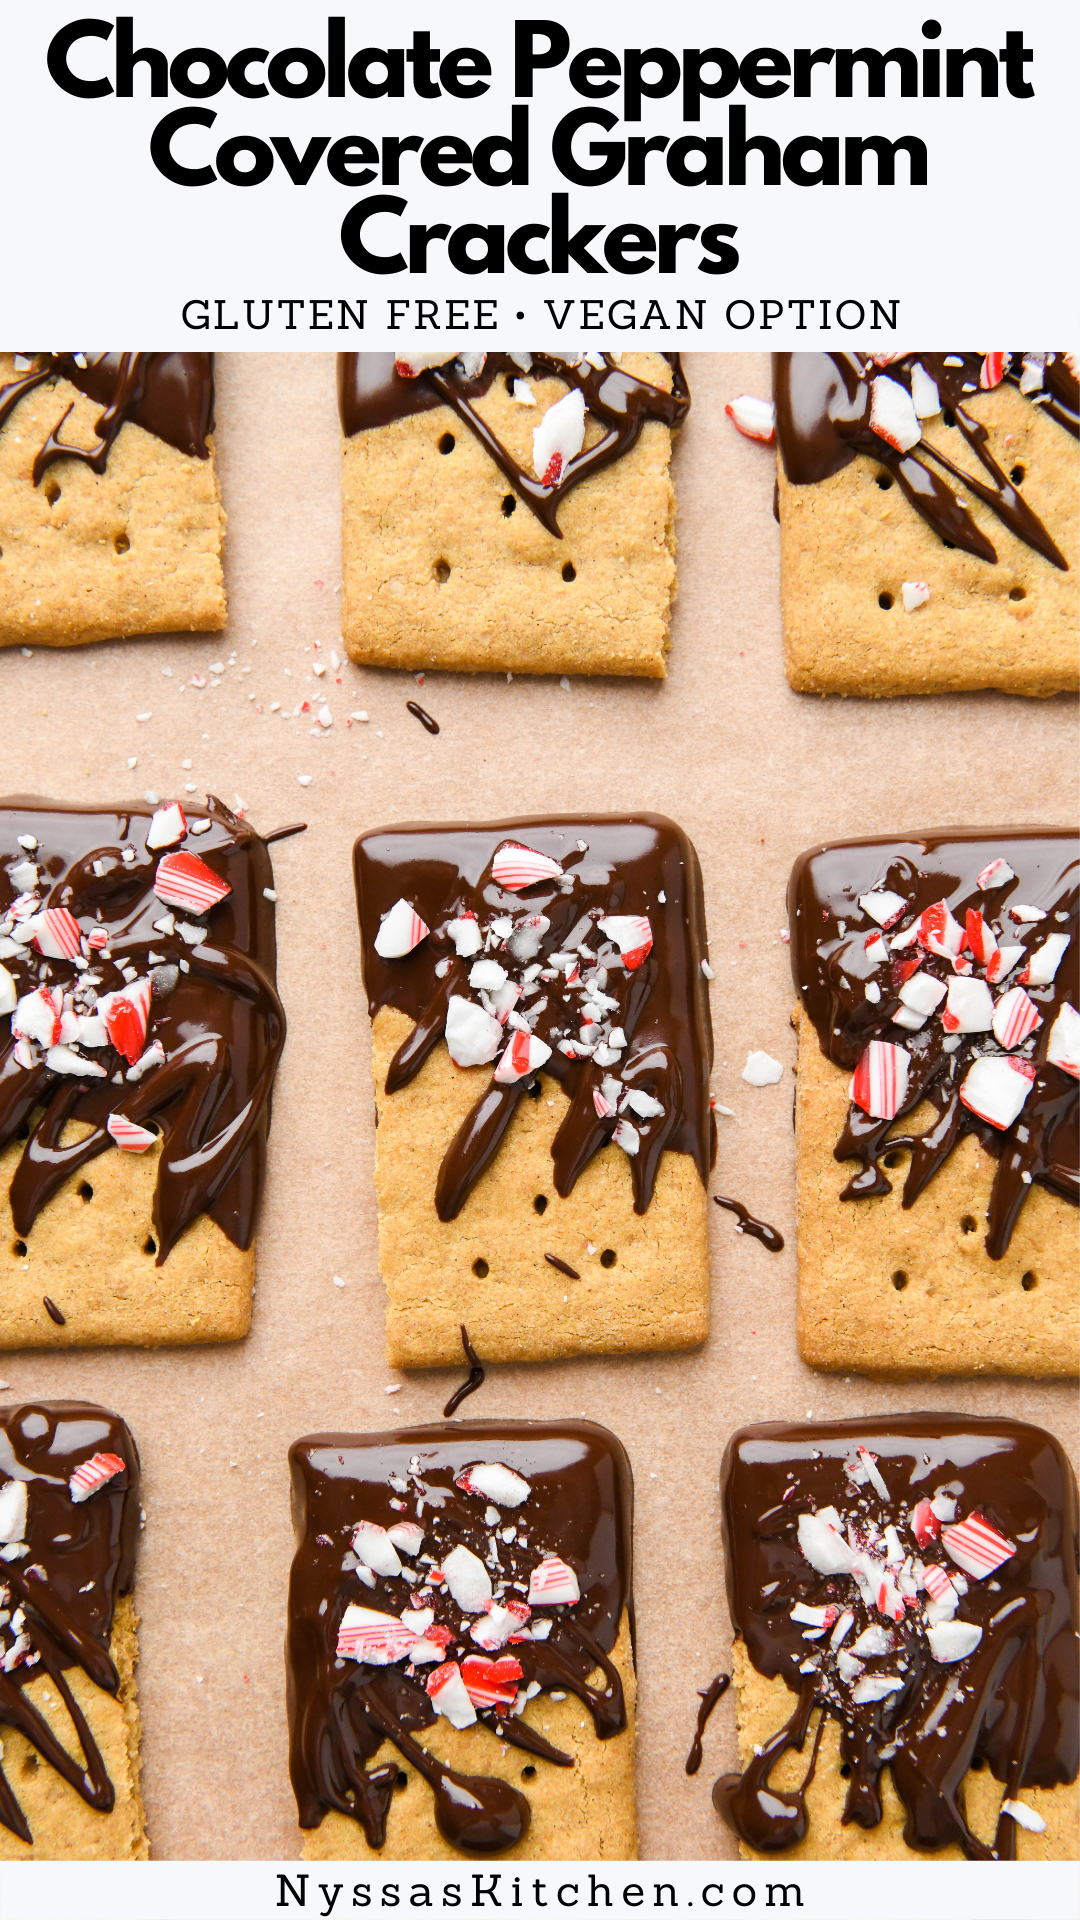 Chocolate peppermint covered graham crackers are a delicious and easy holiday treat! Made with gluten free graham crackers, melted chocolate, peppermint extract, and crushed candy canes - no baking required. A simple and festive dessert that the whole family will love making and eating! Gluten free, vegan option.